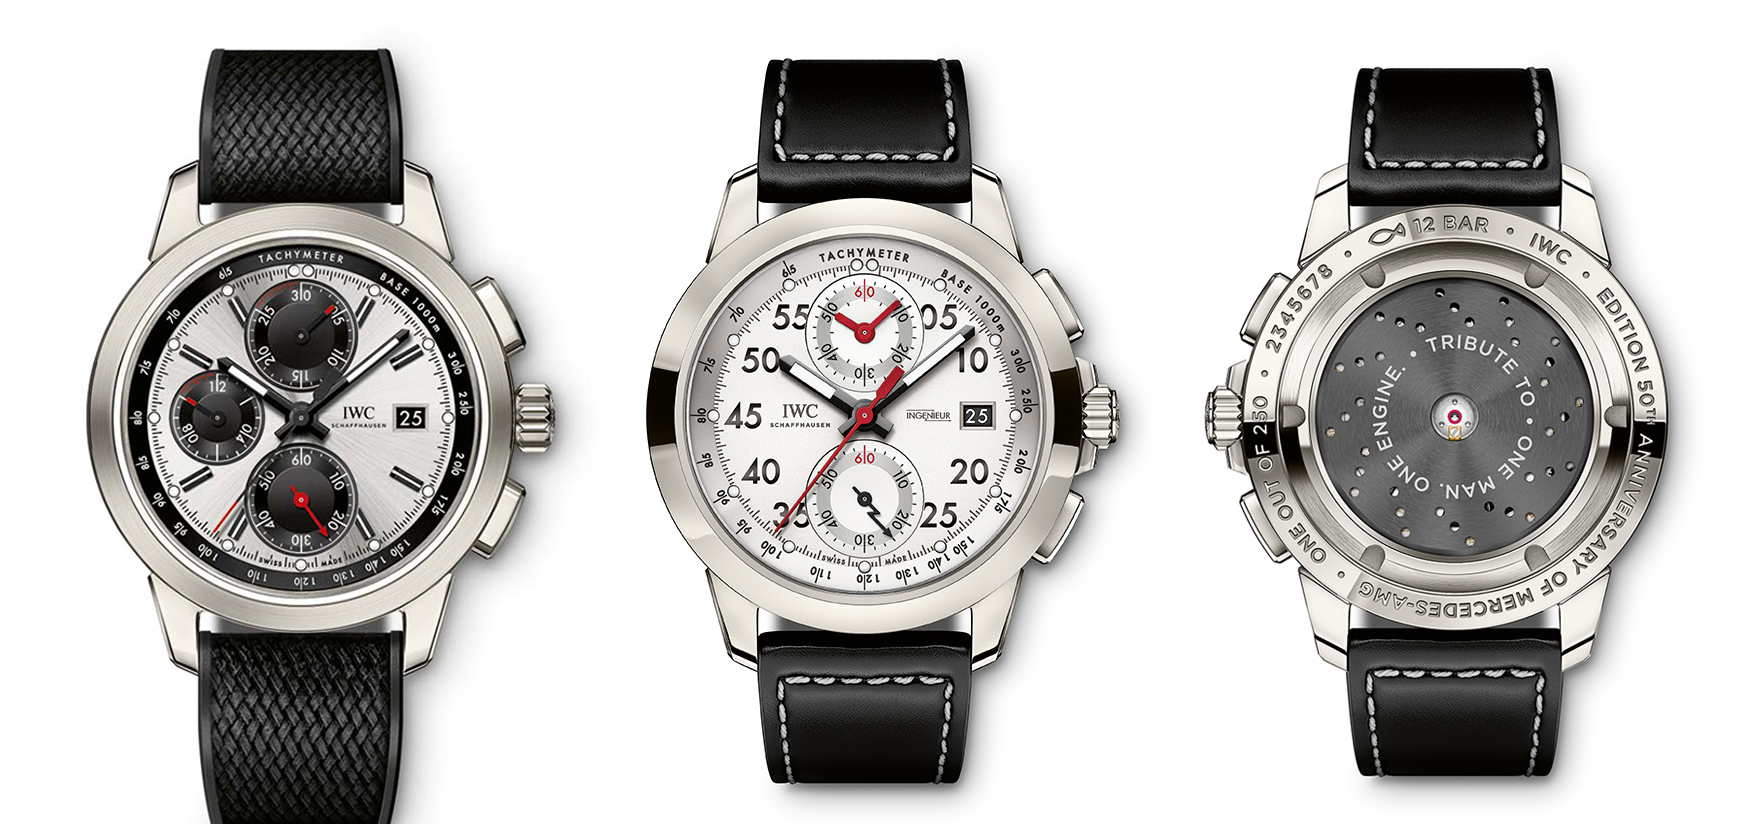 Left: The IWC-manufactured 89361 calibre with flyback function combines the stopped hours and minutes in a counter at “12 o’clock”. A soft-iron cage protects the movement from magnetic fields. The lower part of this cage is visible through a sapphire-glass back and emulates the appearance of a typical AMG brake disc with bores arranged in a radial formation. Right: The decision to limit production to 77 watches was based on Cancellara’s favourite number: 7. The IWC-manufactured 69370 calibre generates a power reserve of 46 hours with a bidirectional pawl-winding system. Spokes have been printed onto the glass back cover, recalling the image of a racing bike.